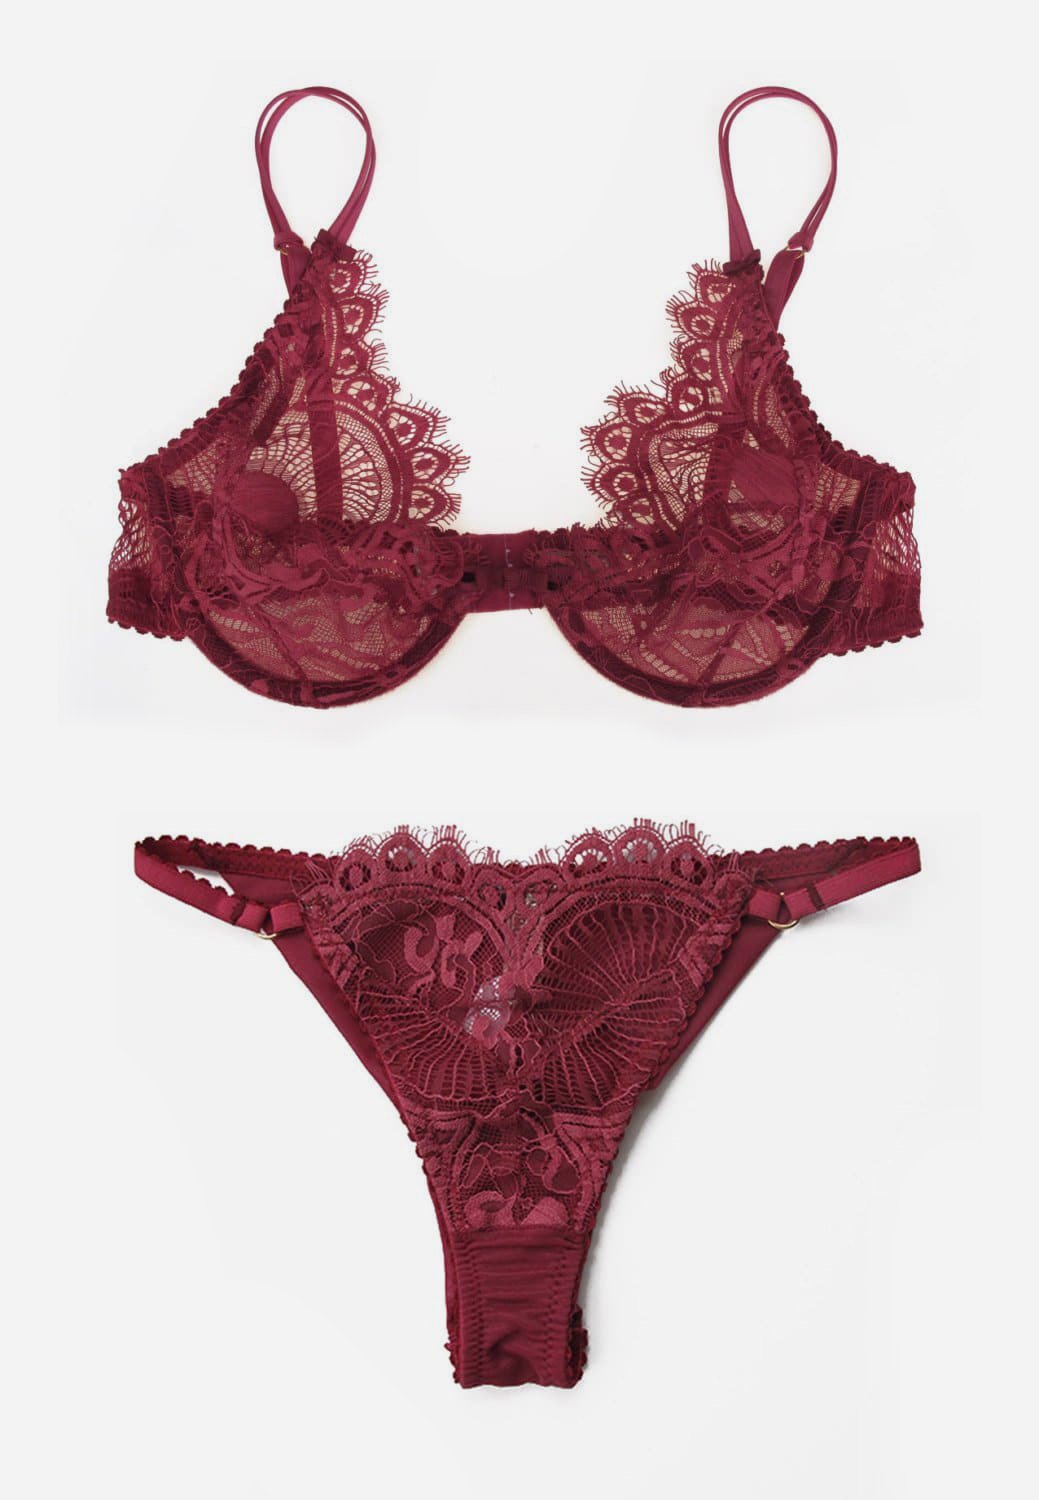 https://mariannagiordana.com/wp-content/uploads/2018/09/red-lace-see-through-lingerie-bra-with-underwire-and-tanga.jpeg